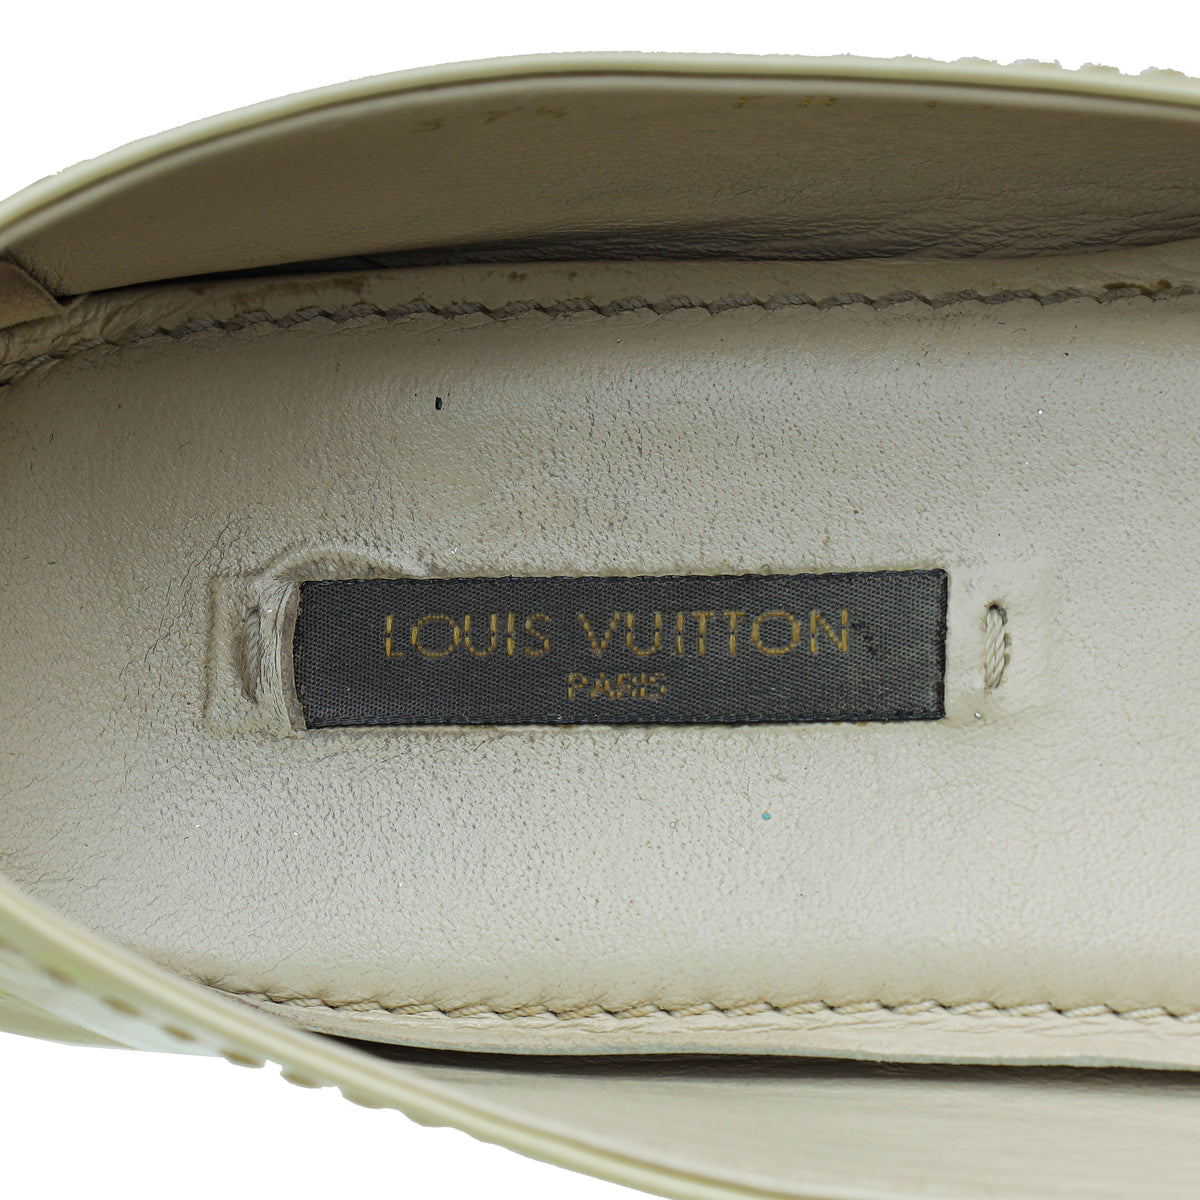 Louis Vuitton Brown Leather LV Buckle Ballet Flats Size 37.5 For